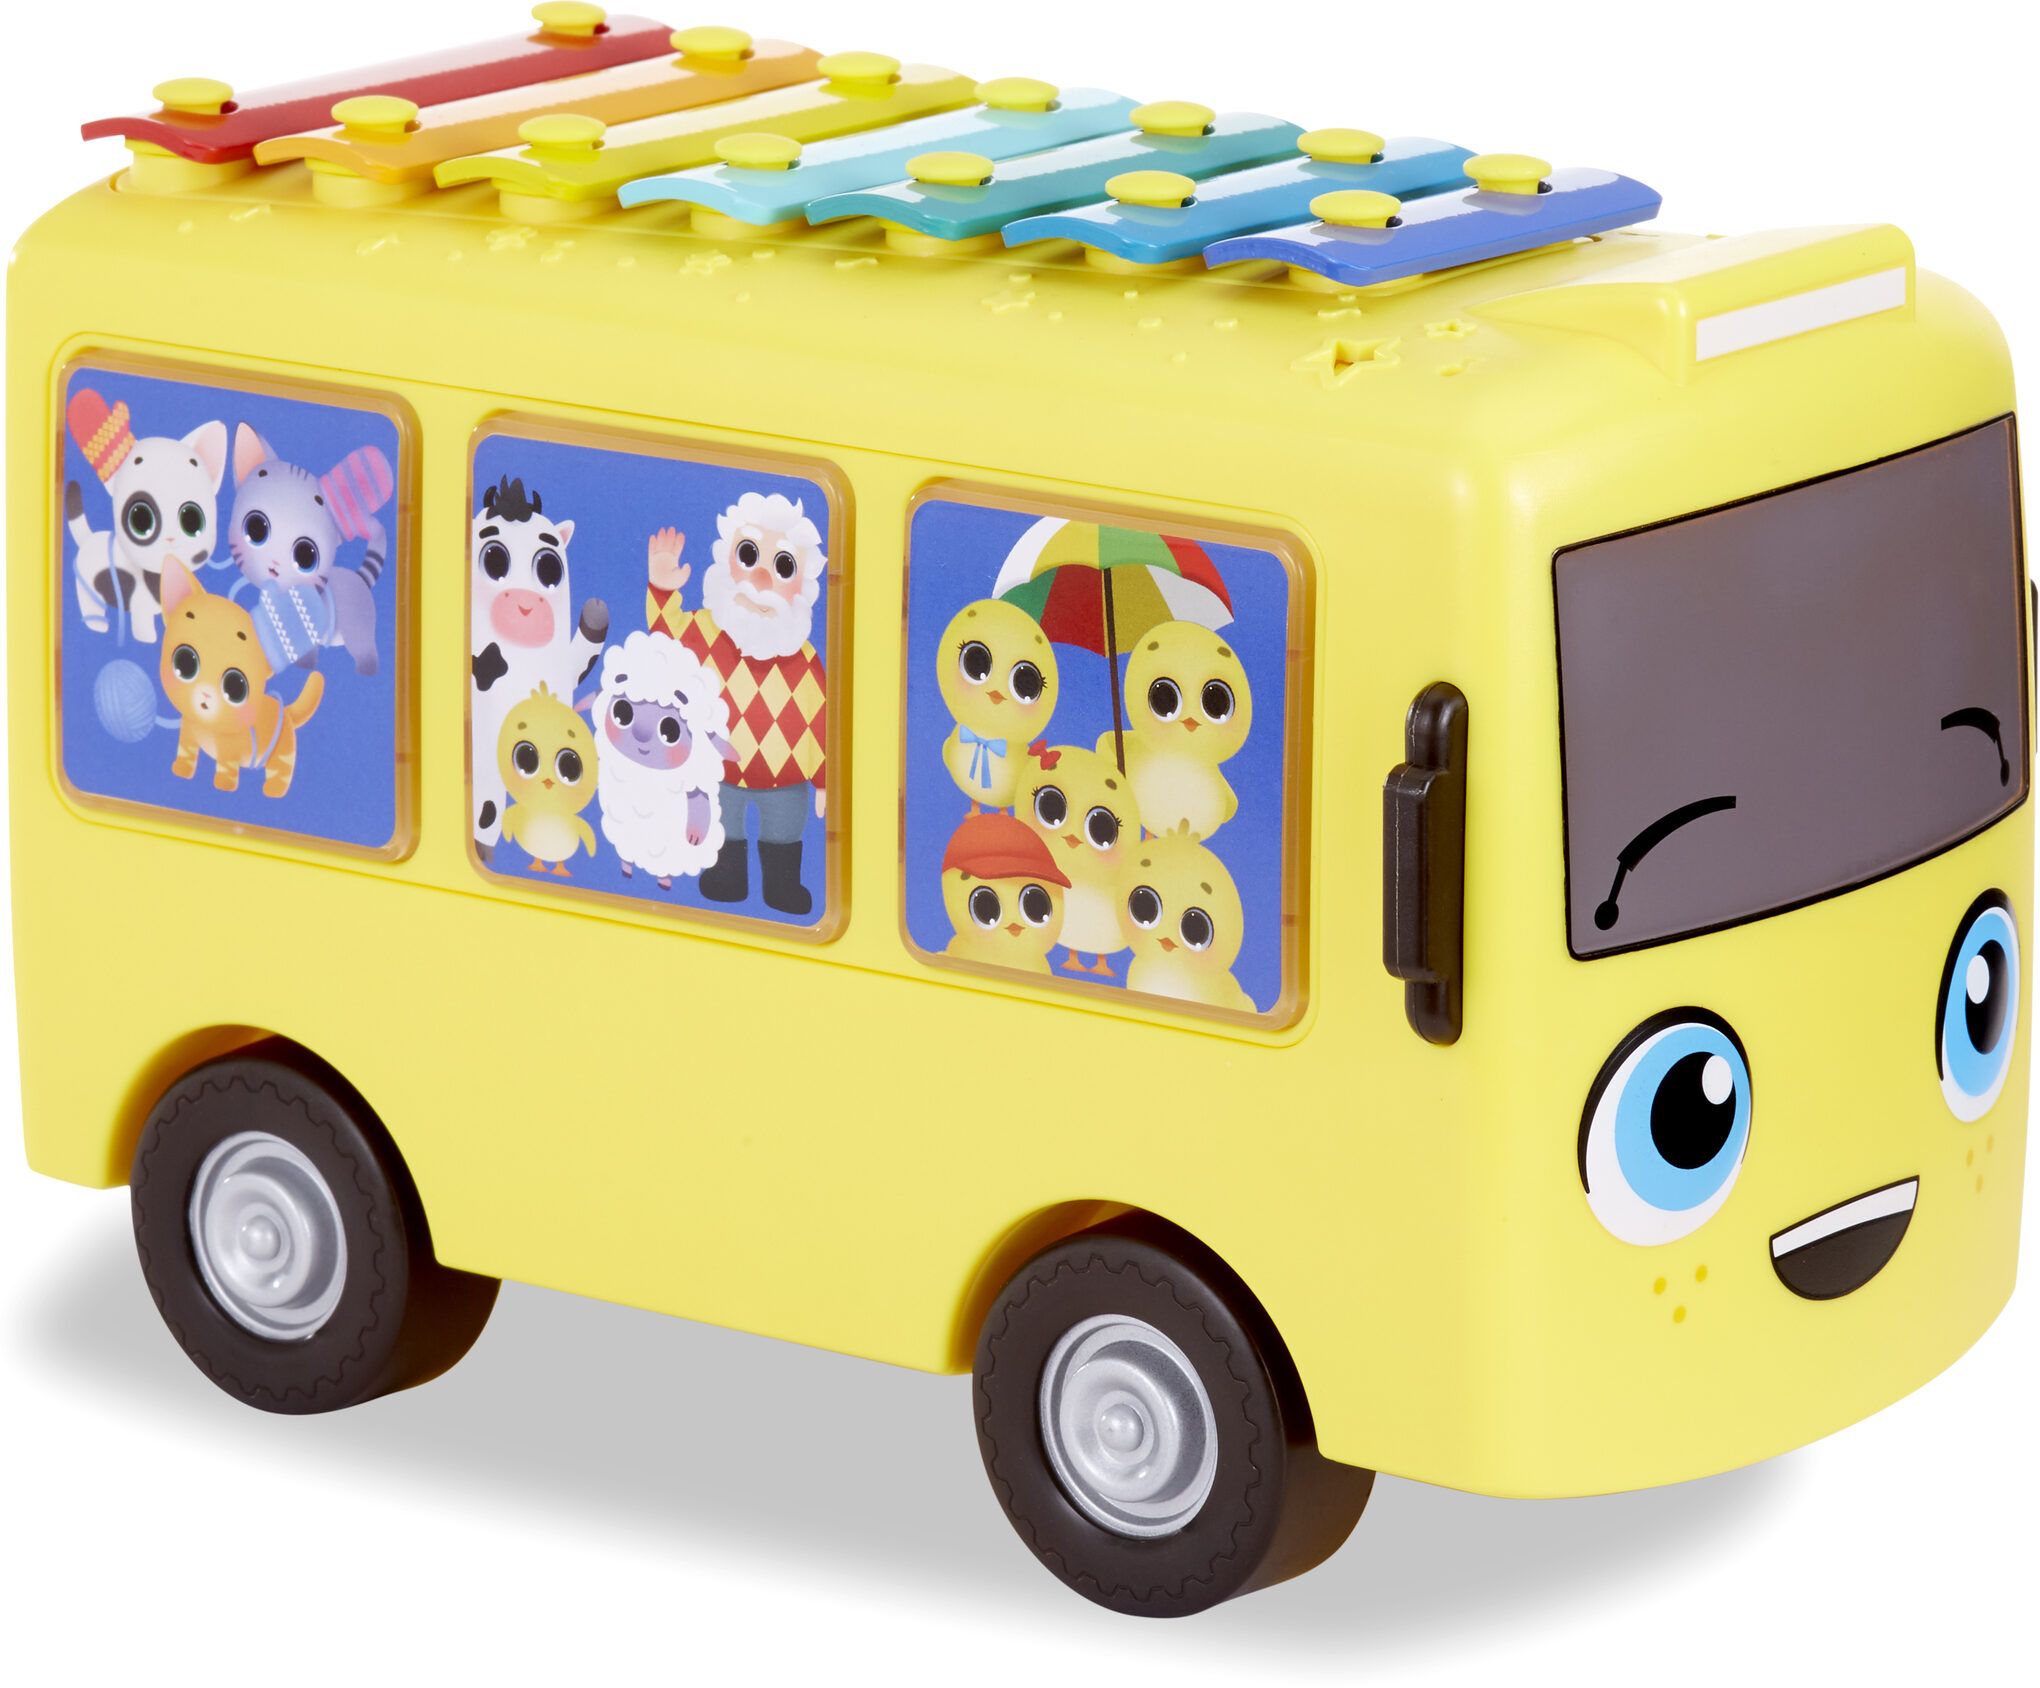 An image of Little Tikes Little Baby Bum 3-in-1 Music Bus